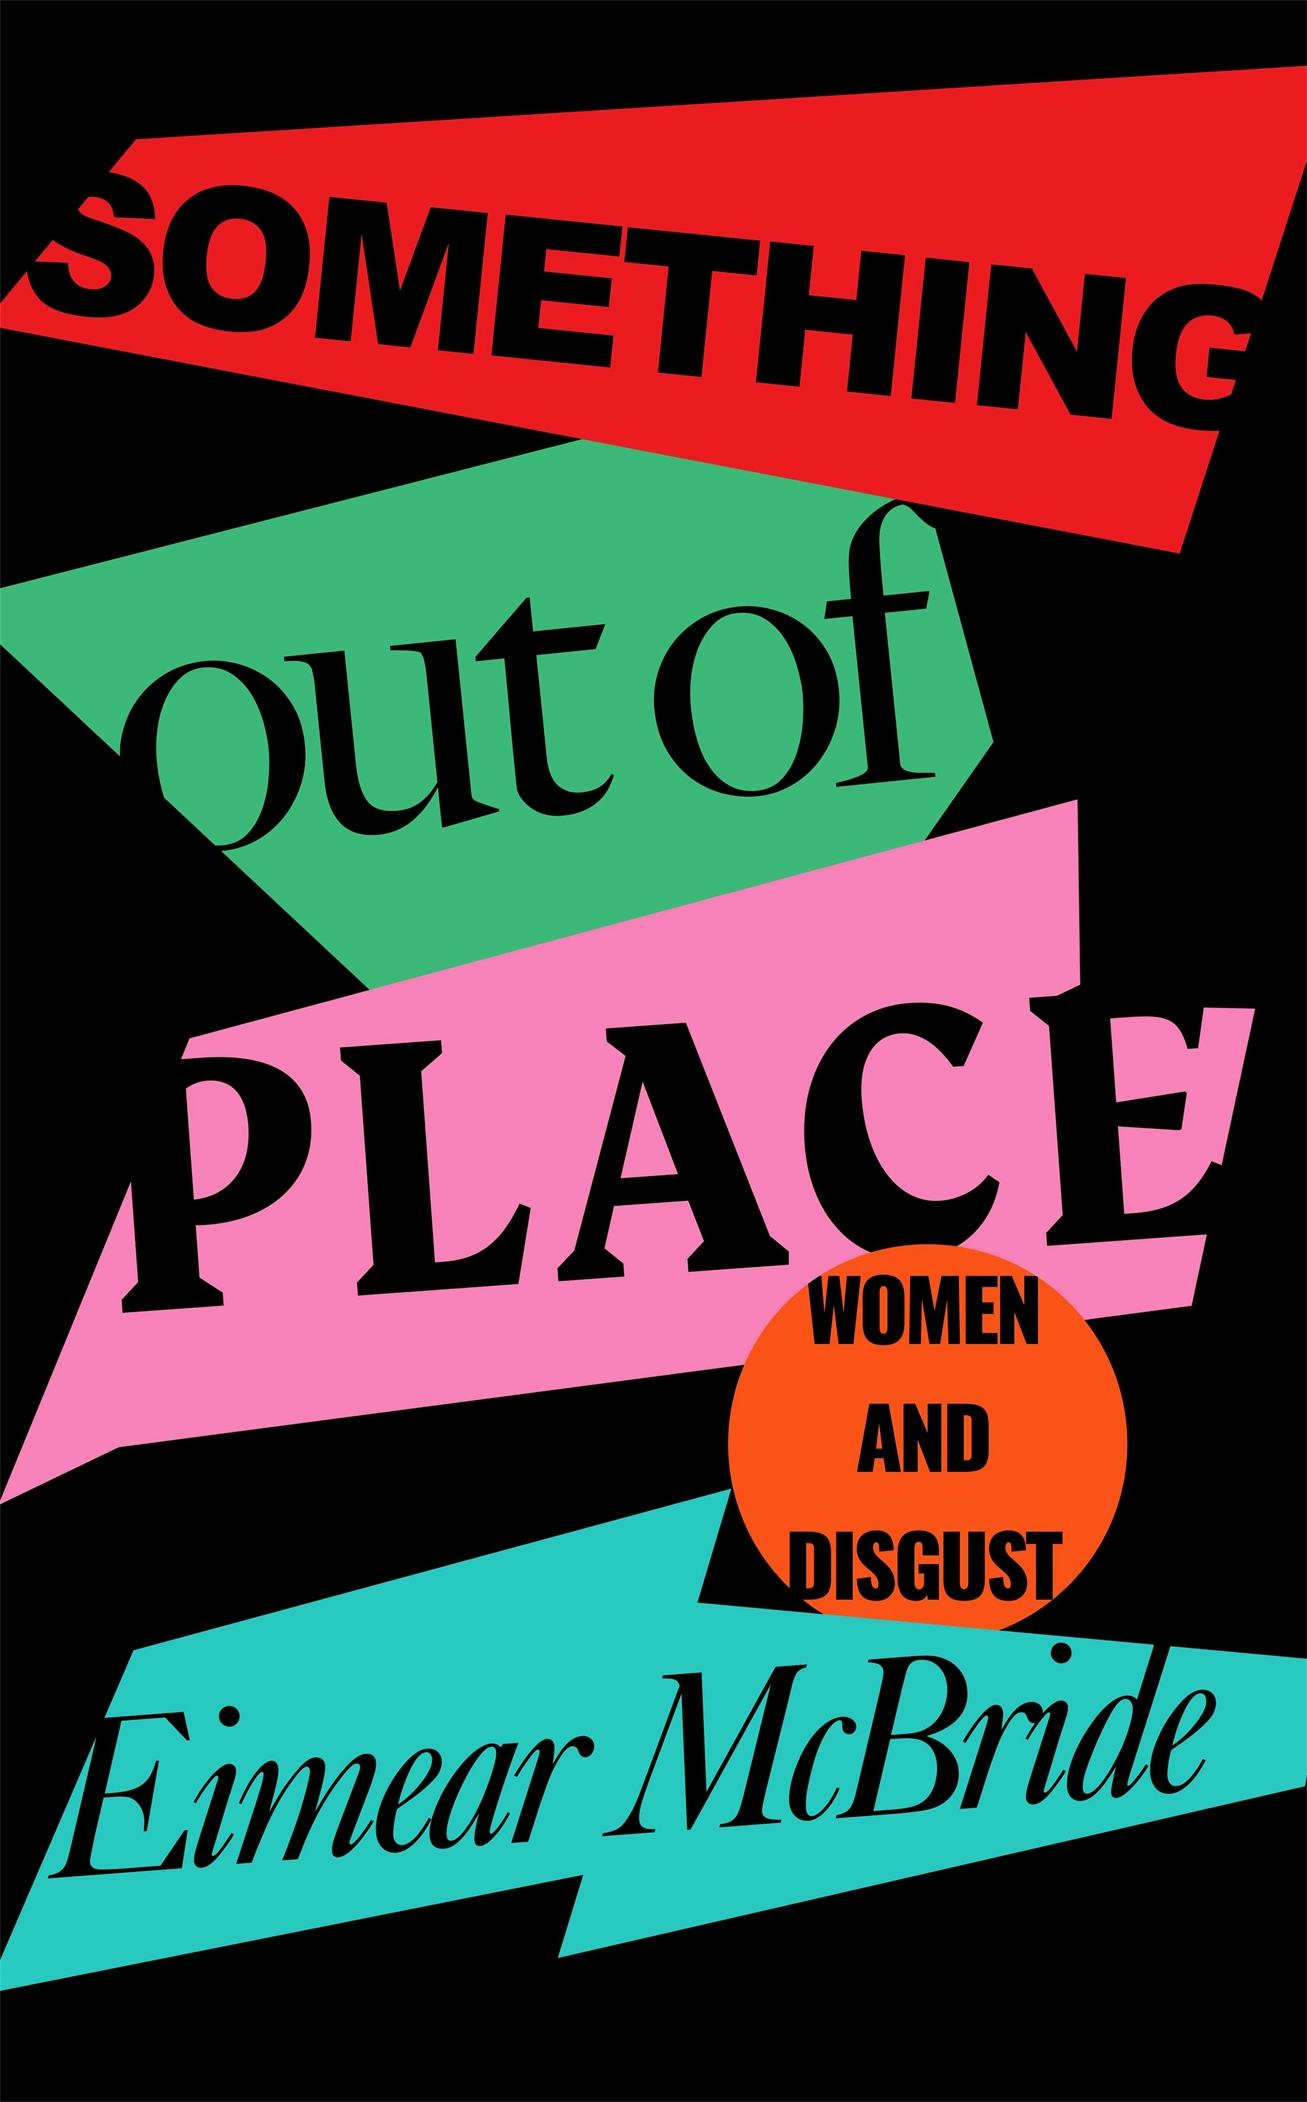 ‘Something Out of Place, Women and Disgust’ book jacket